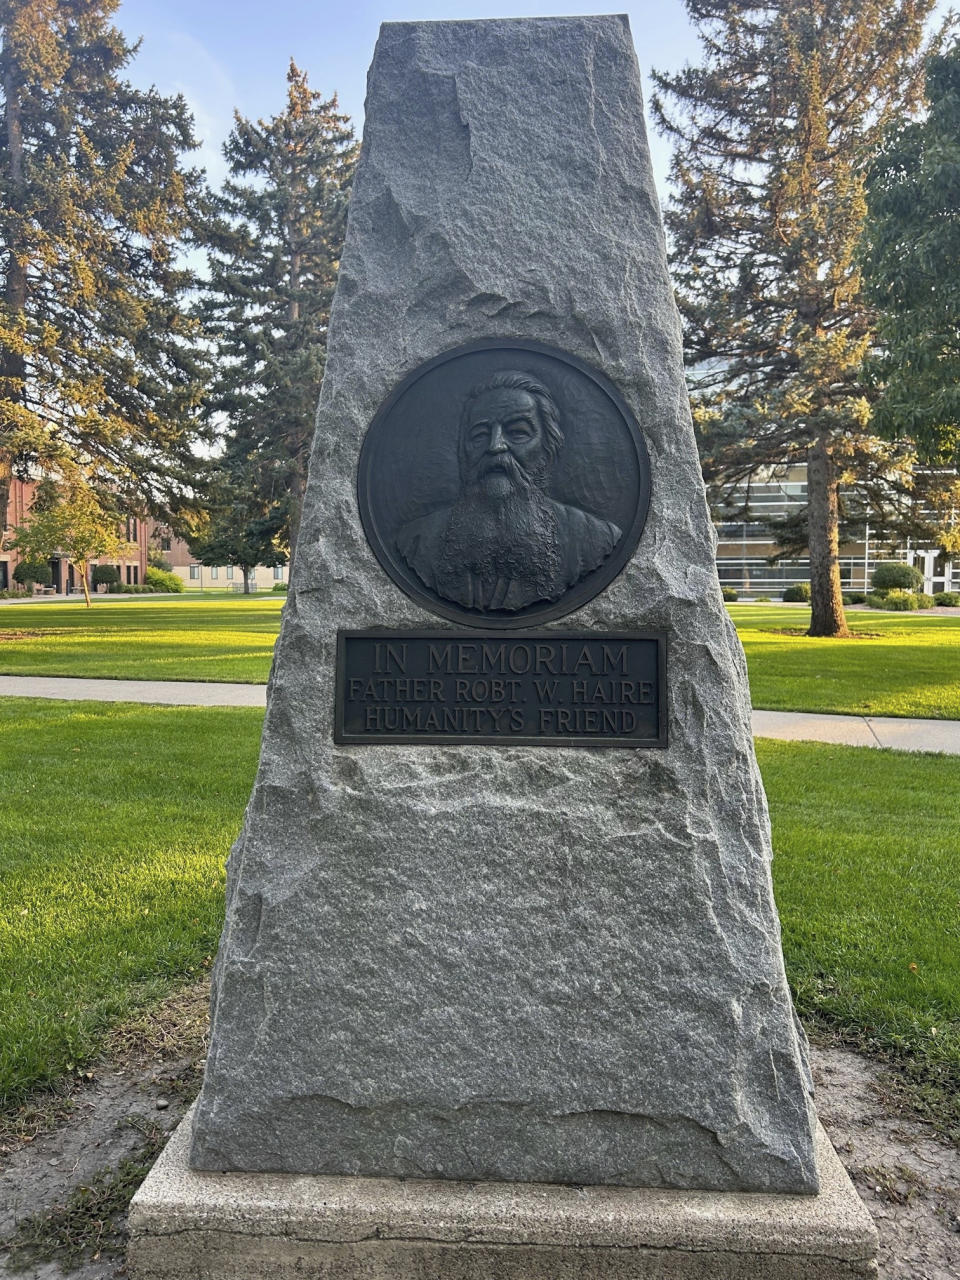 In this photo provided by Tom Heinz, a monument dedicated to the Rev. Robert W. Haire, calling him "humanity's friend," stands on Northern State University campus in Aberdeen, South Dakota, on Wednesday, Sept. 13, 2023. The socialist Catholic priest and direct democracy advocate served on the South Dakota Board of Regents and was influential in establishing the university. (Courtesy Tom Heinz via AP)